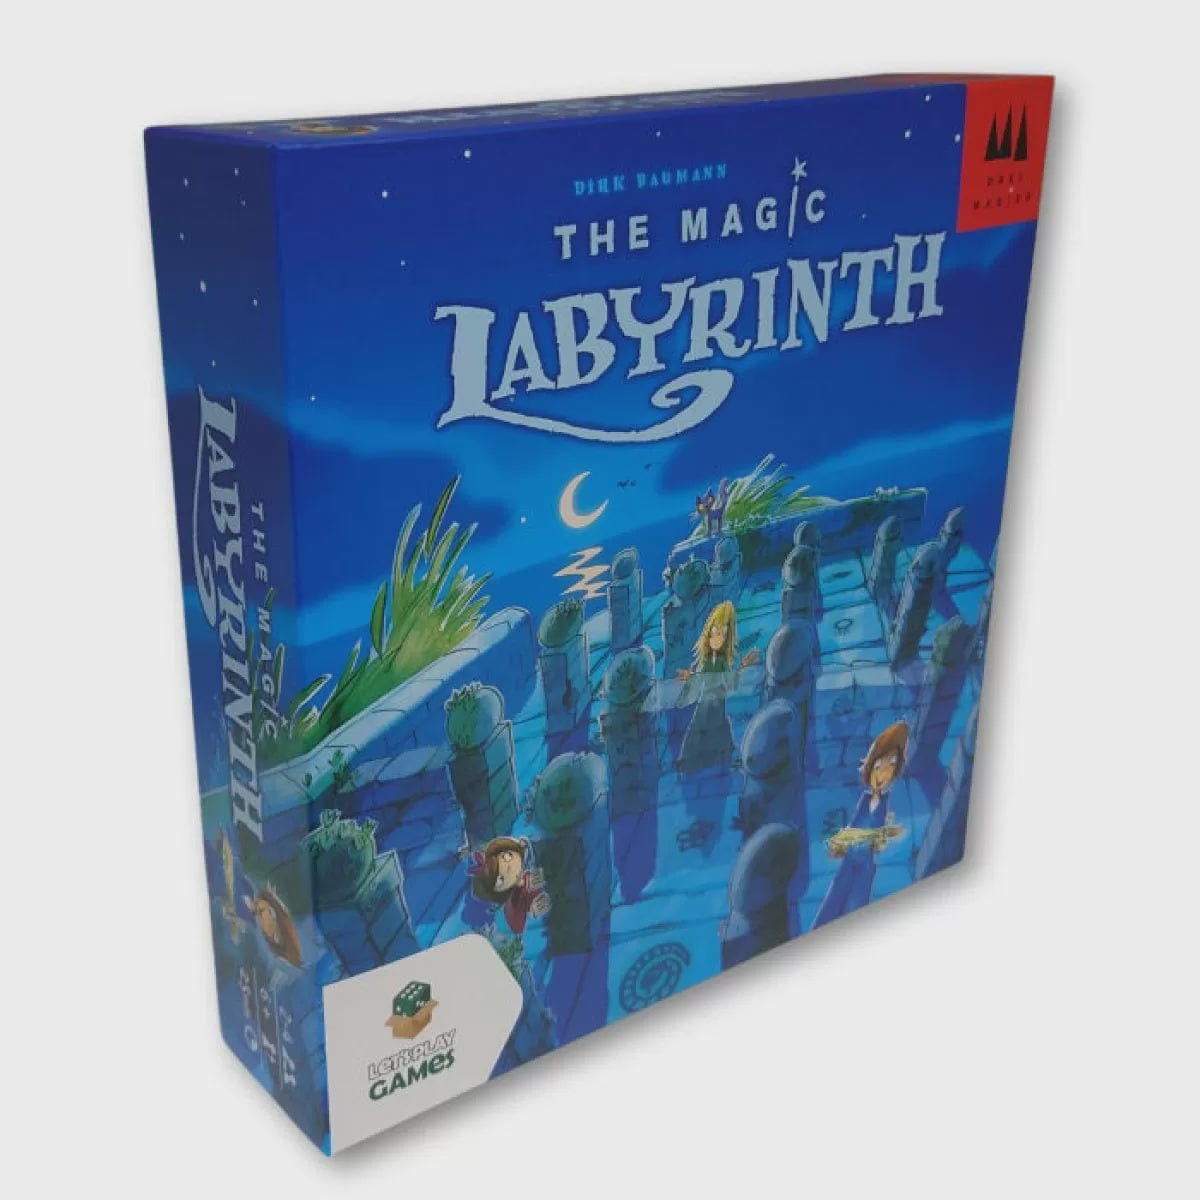 lets play games Board game The Magic Labyrinth (Boardgame)